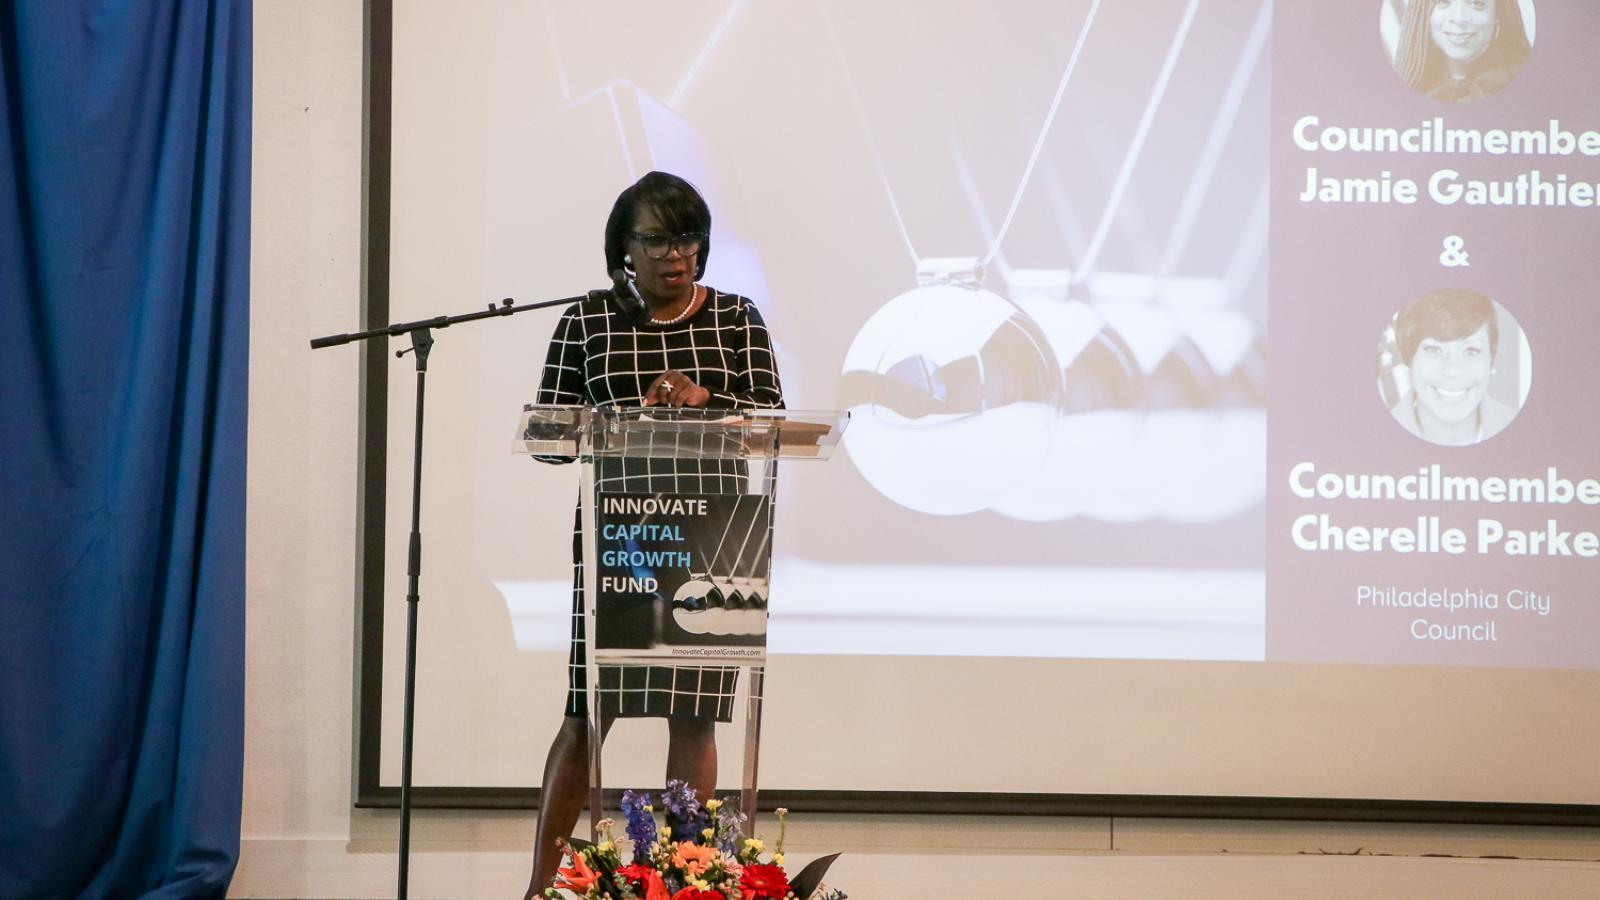 Cherelle Parker speaks at Innovate Capital Growth Fund Launch